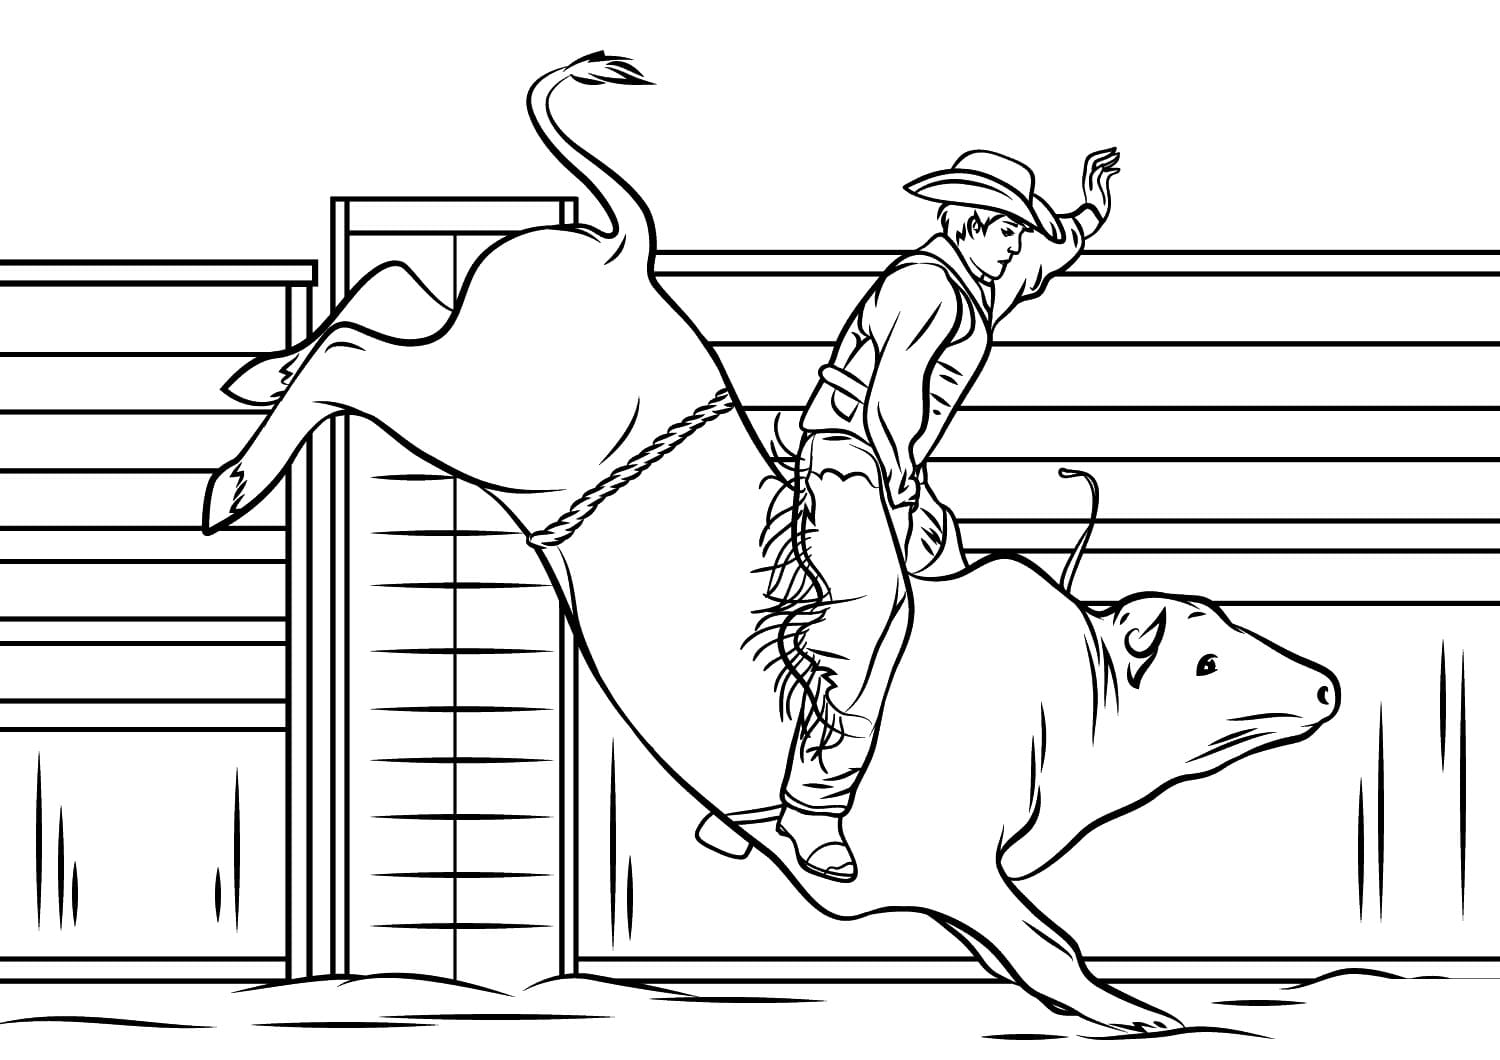 Cowboy Riding a Bull Rodeo coloring page - Download, Print or Color ...